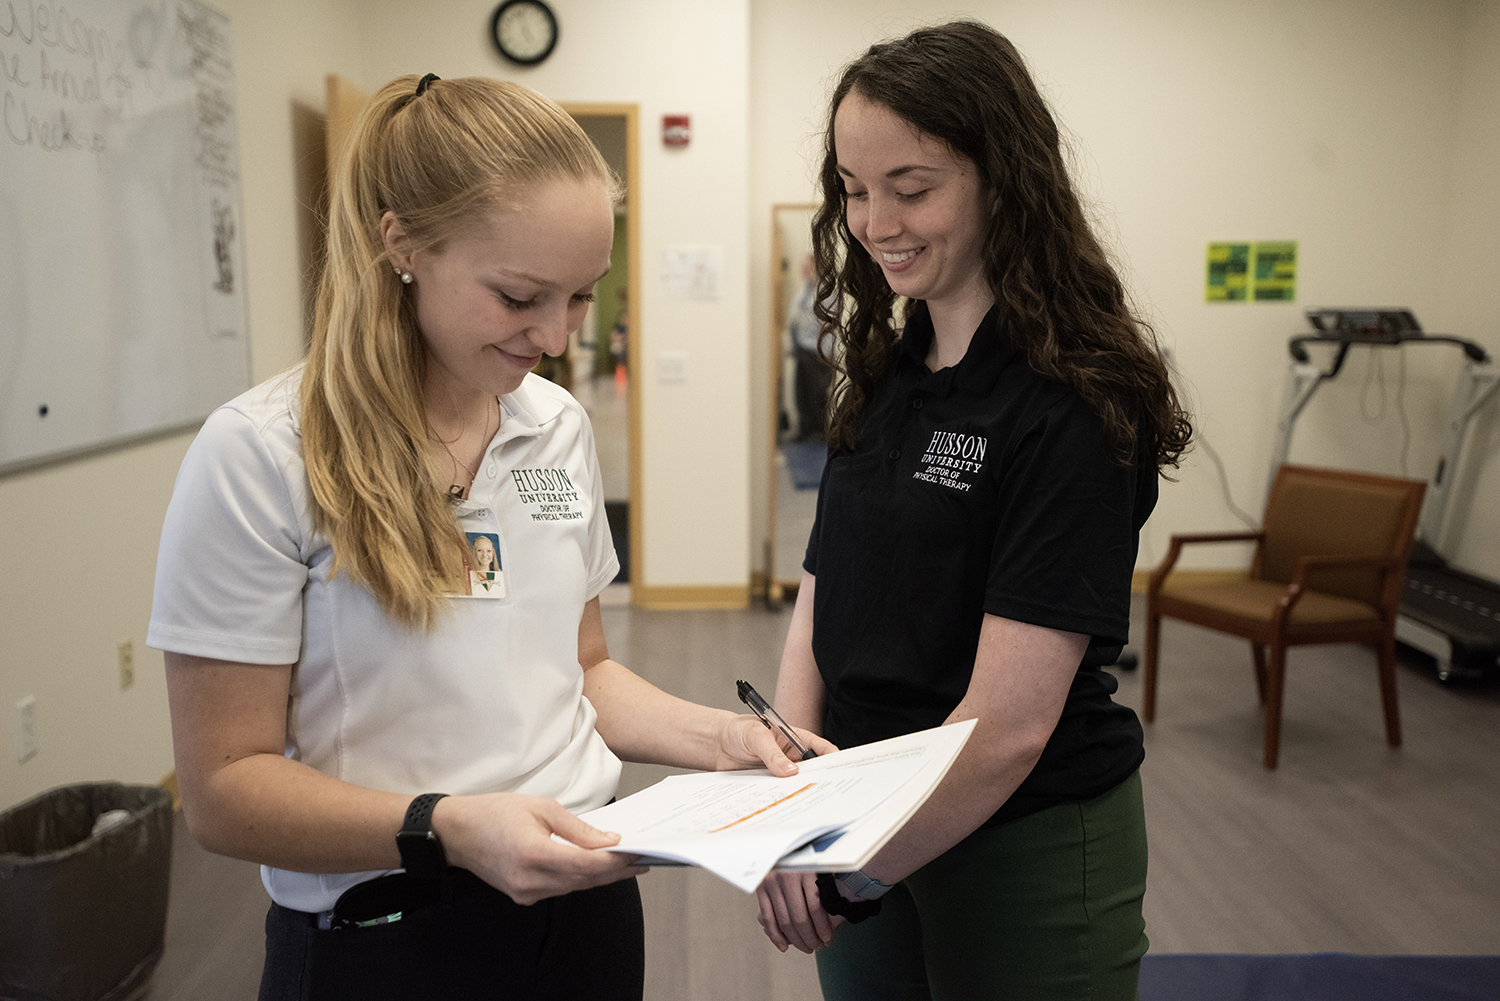 Two Husson University physical therapy students are shown interacting.